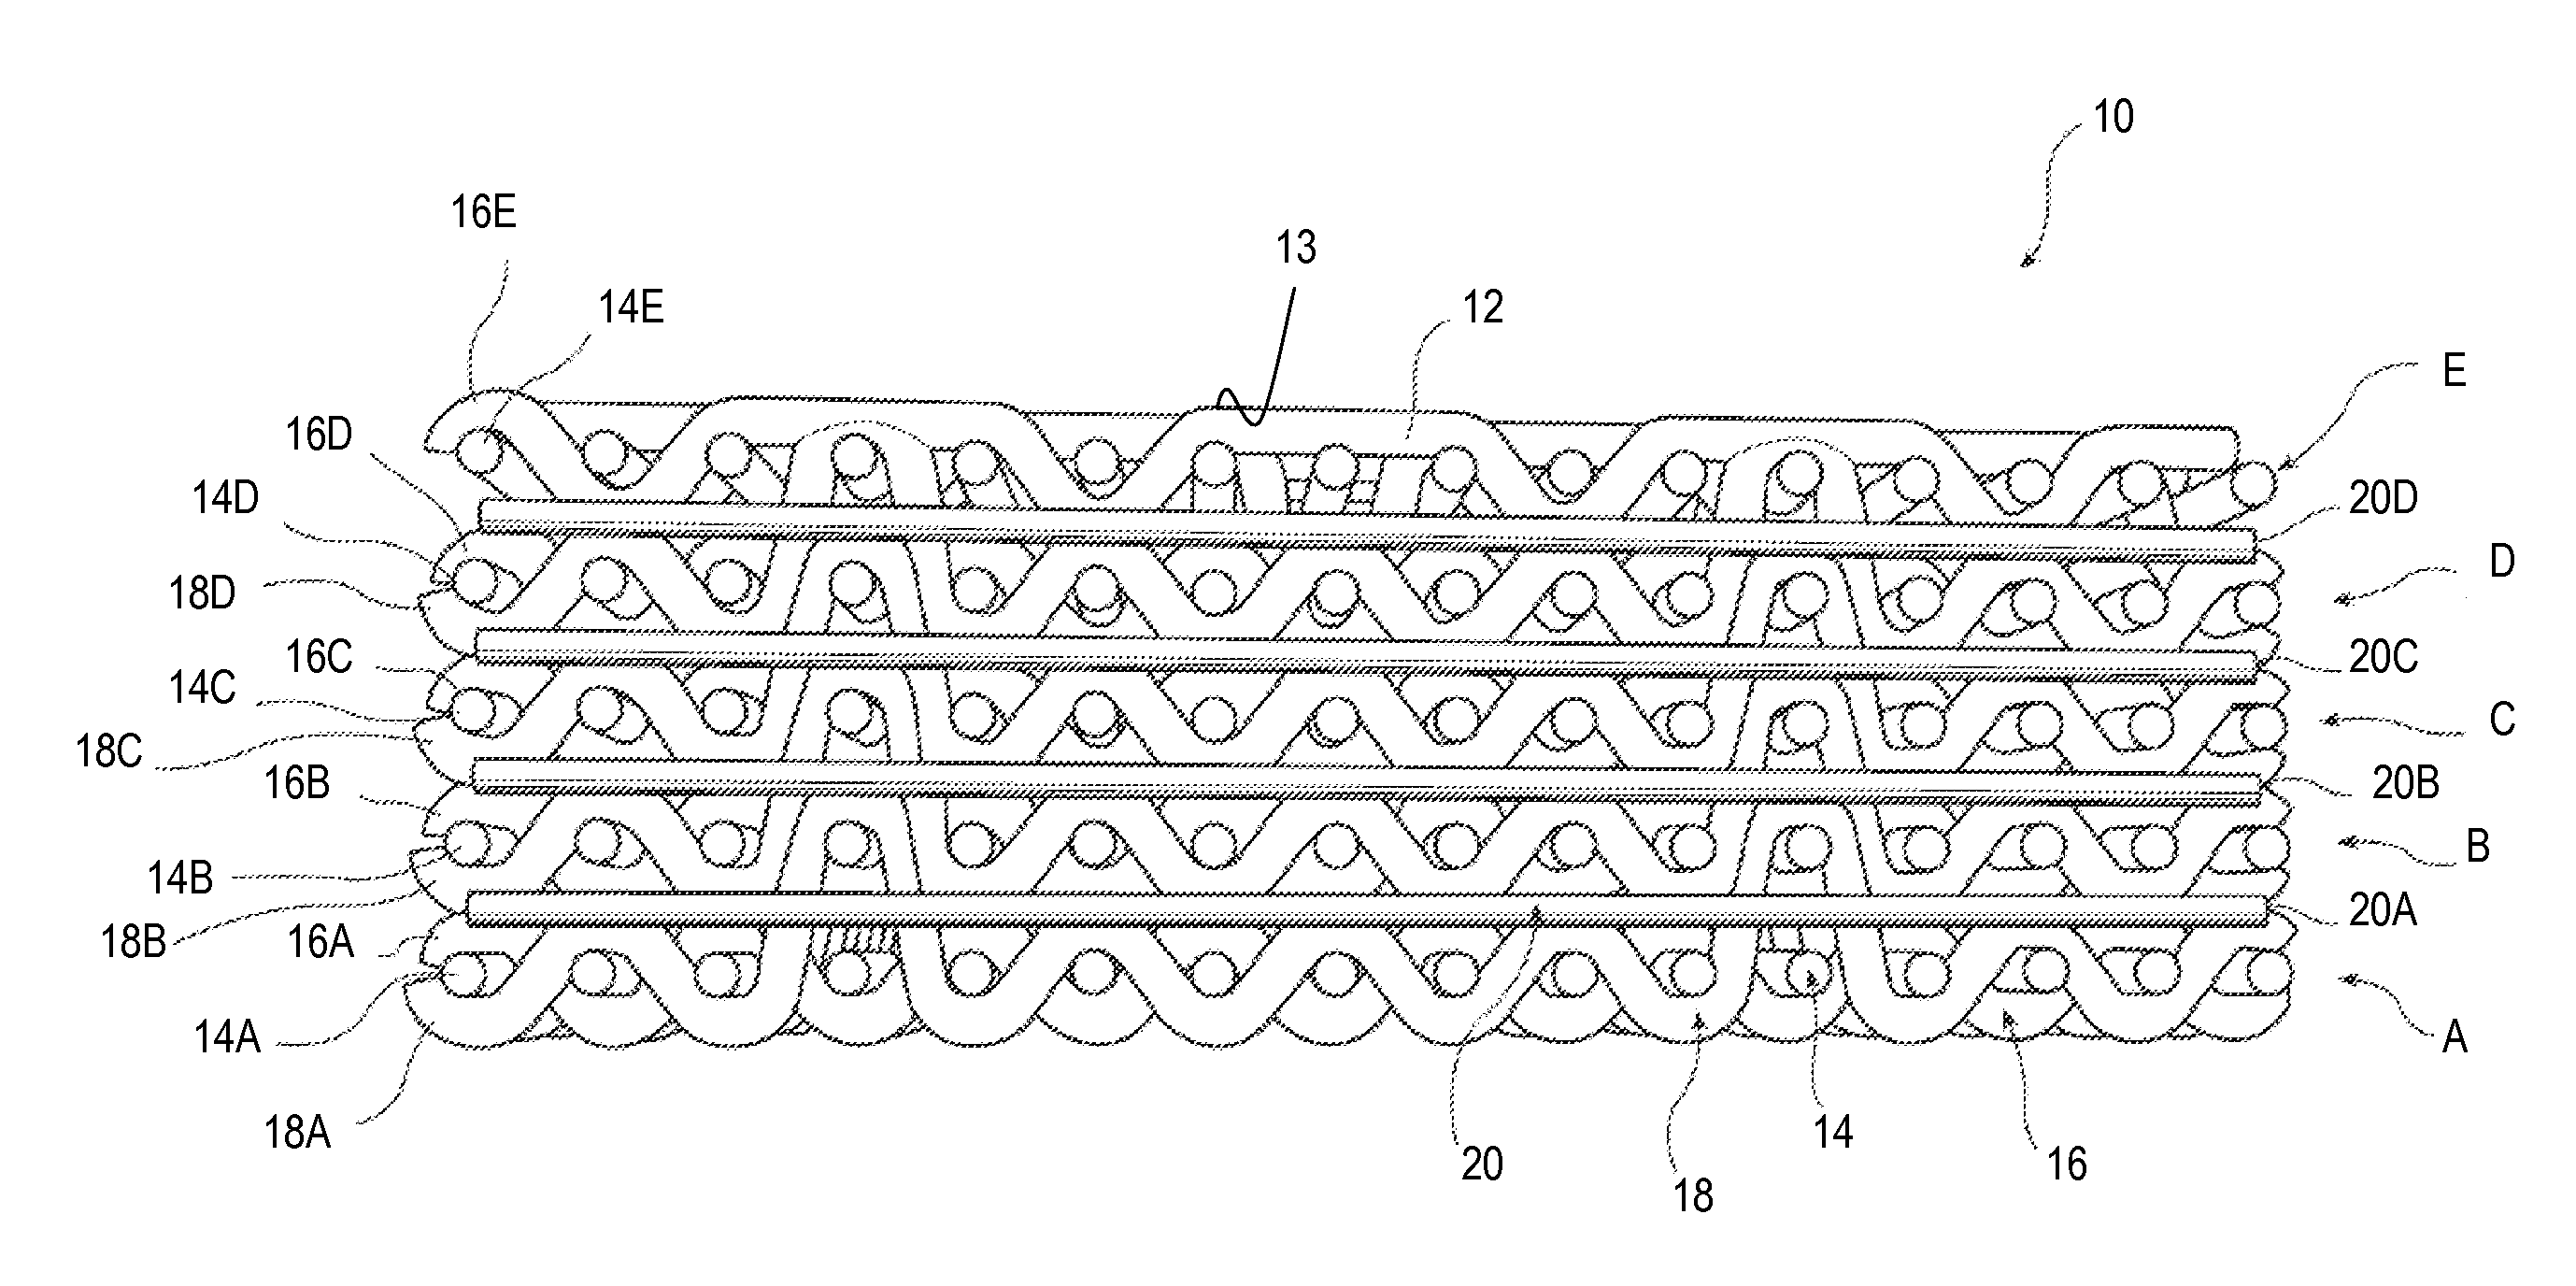 In-line treatment of yarn prior to creating a fabric